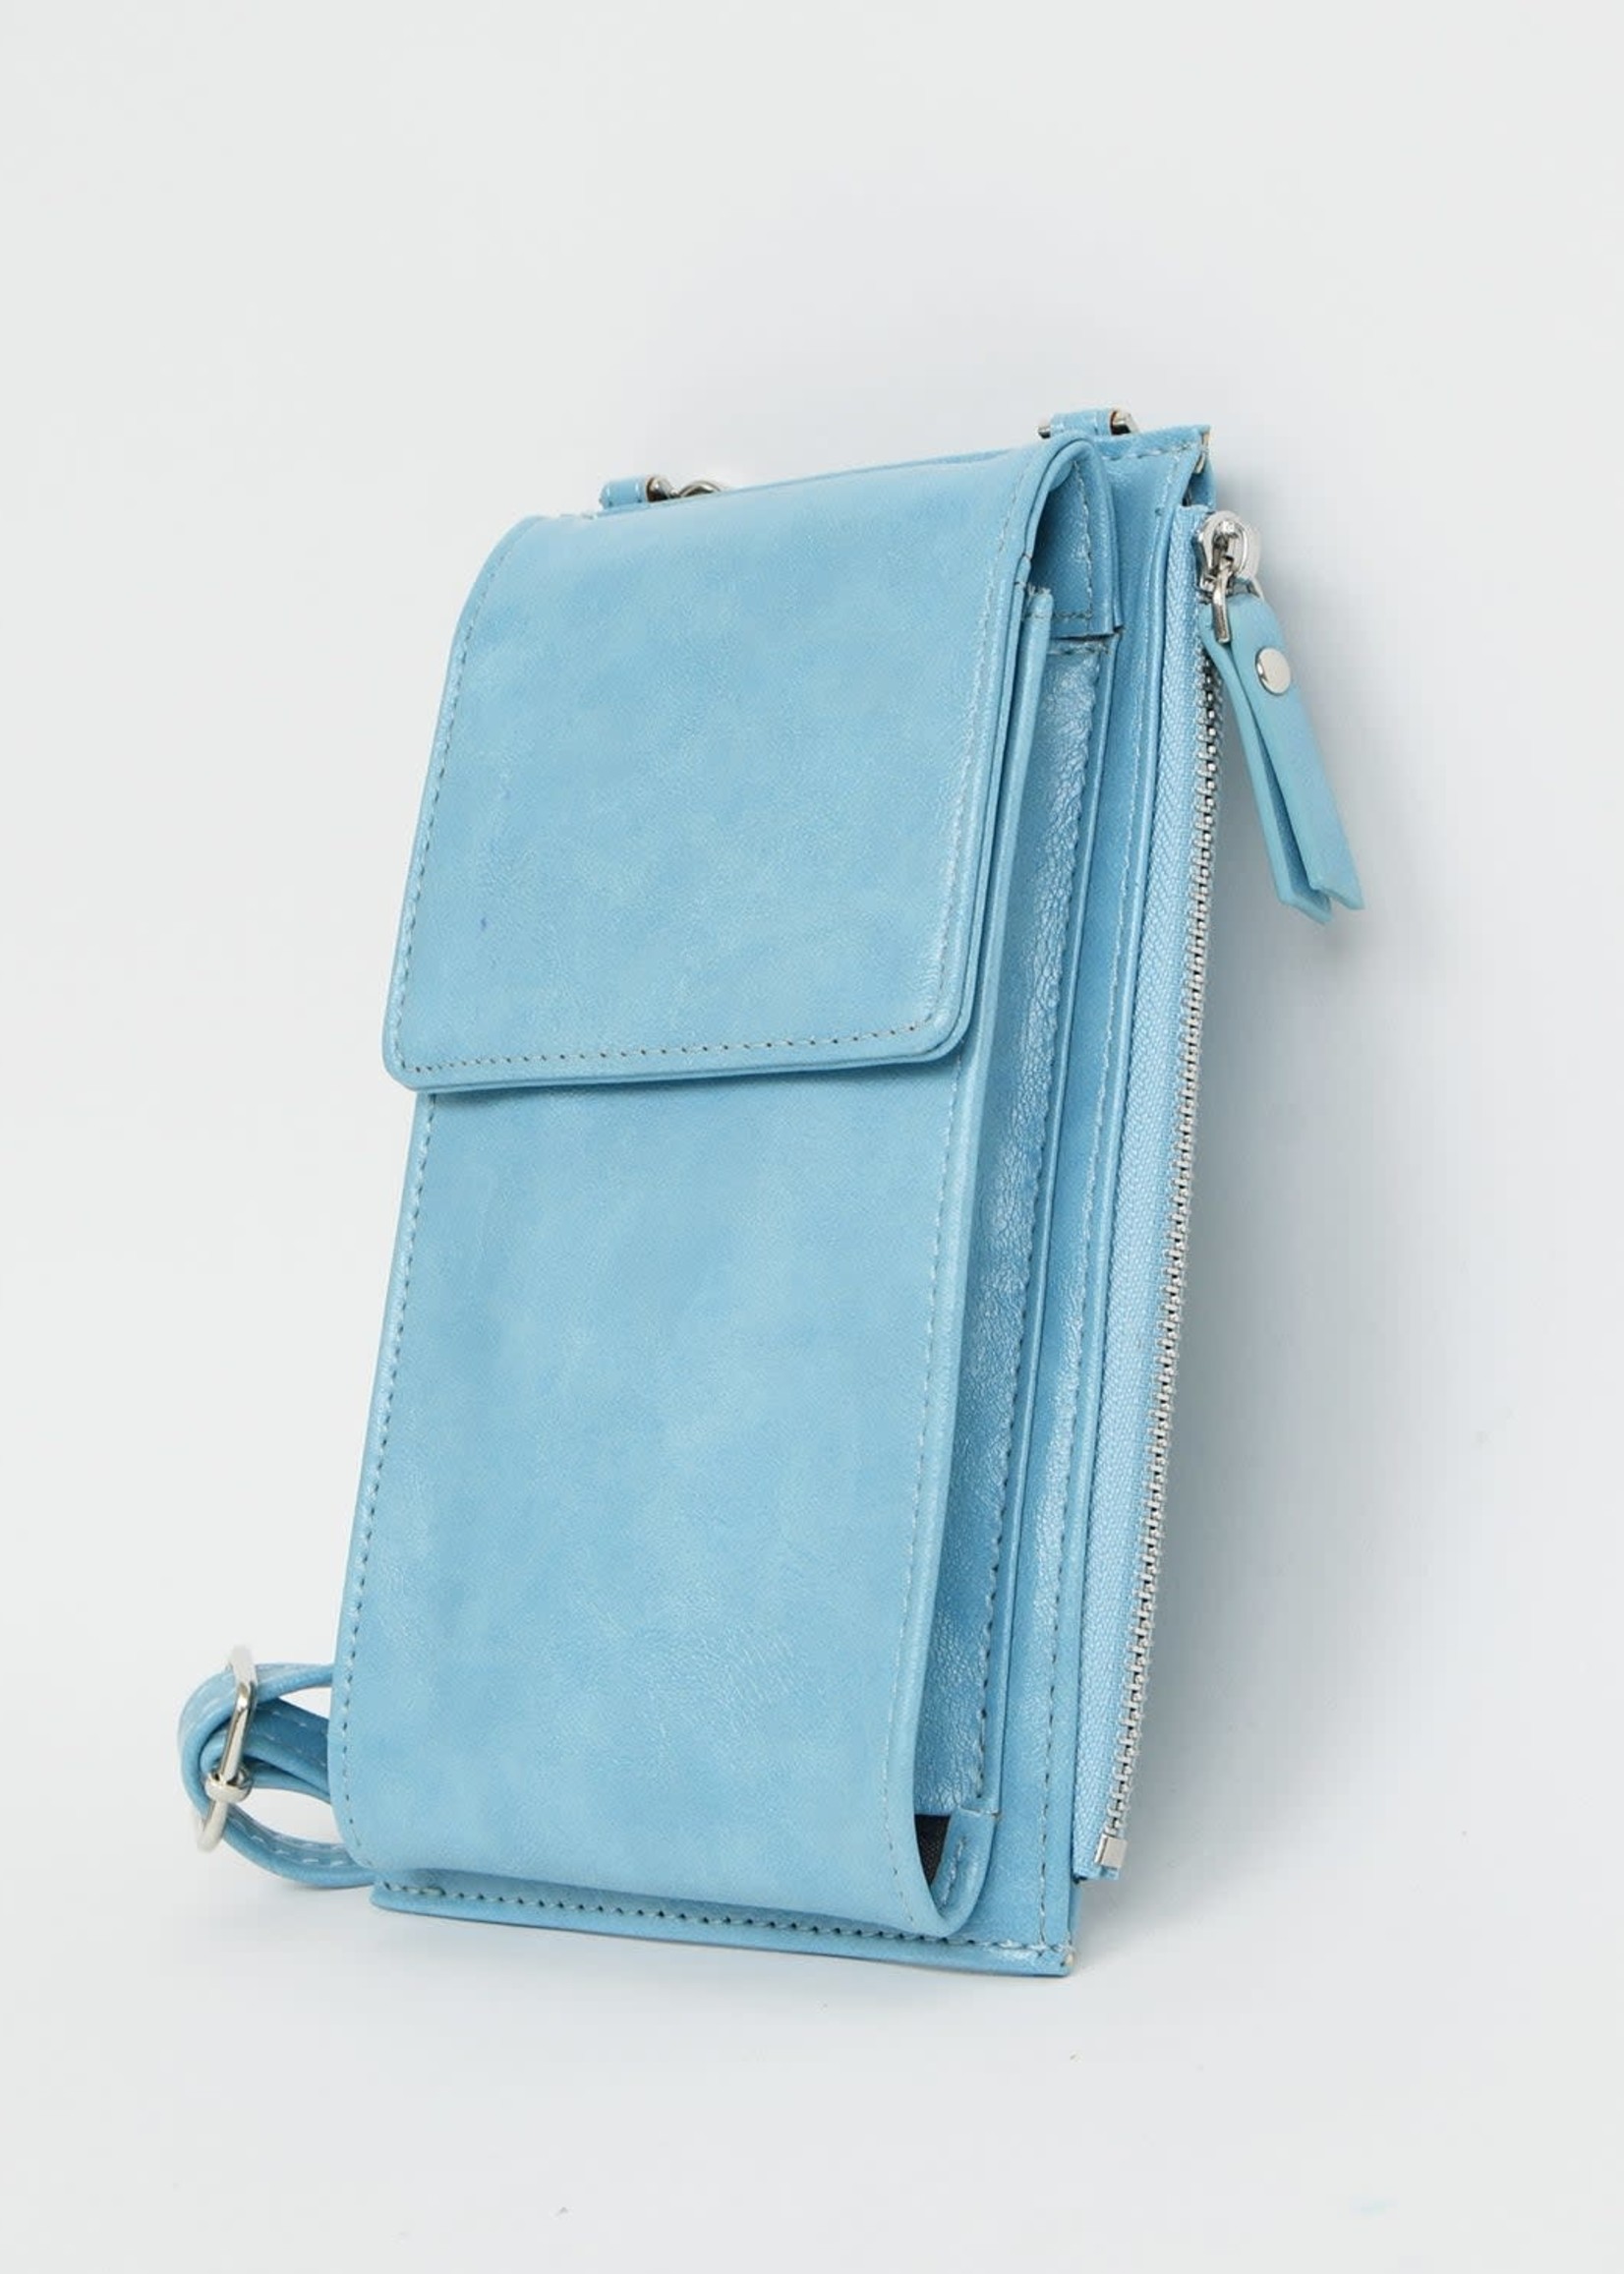 Caracol Caracol 2/1 Wallet/Crossbody Bag Turquoise 7096-TRQ